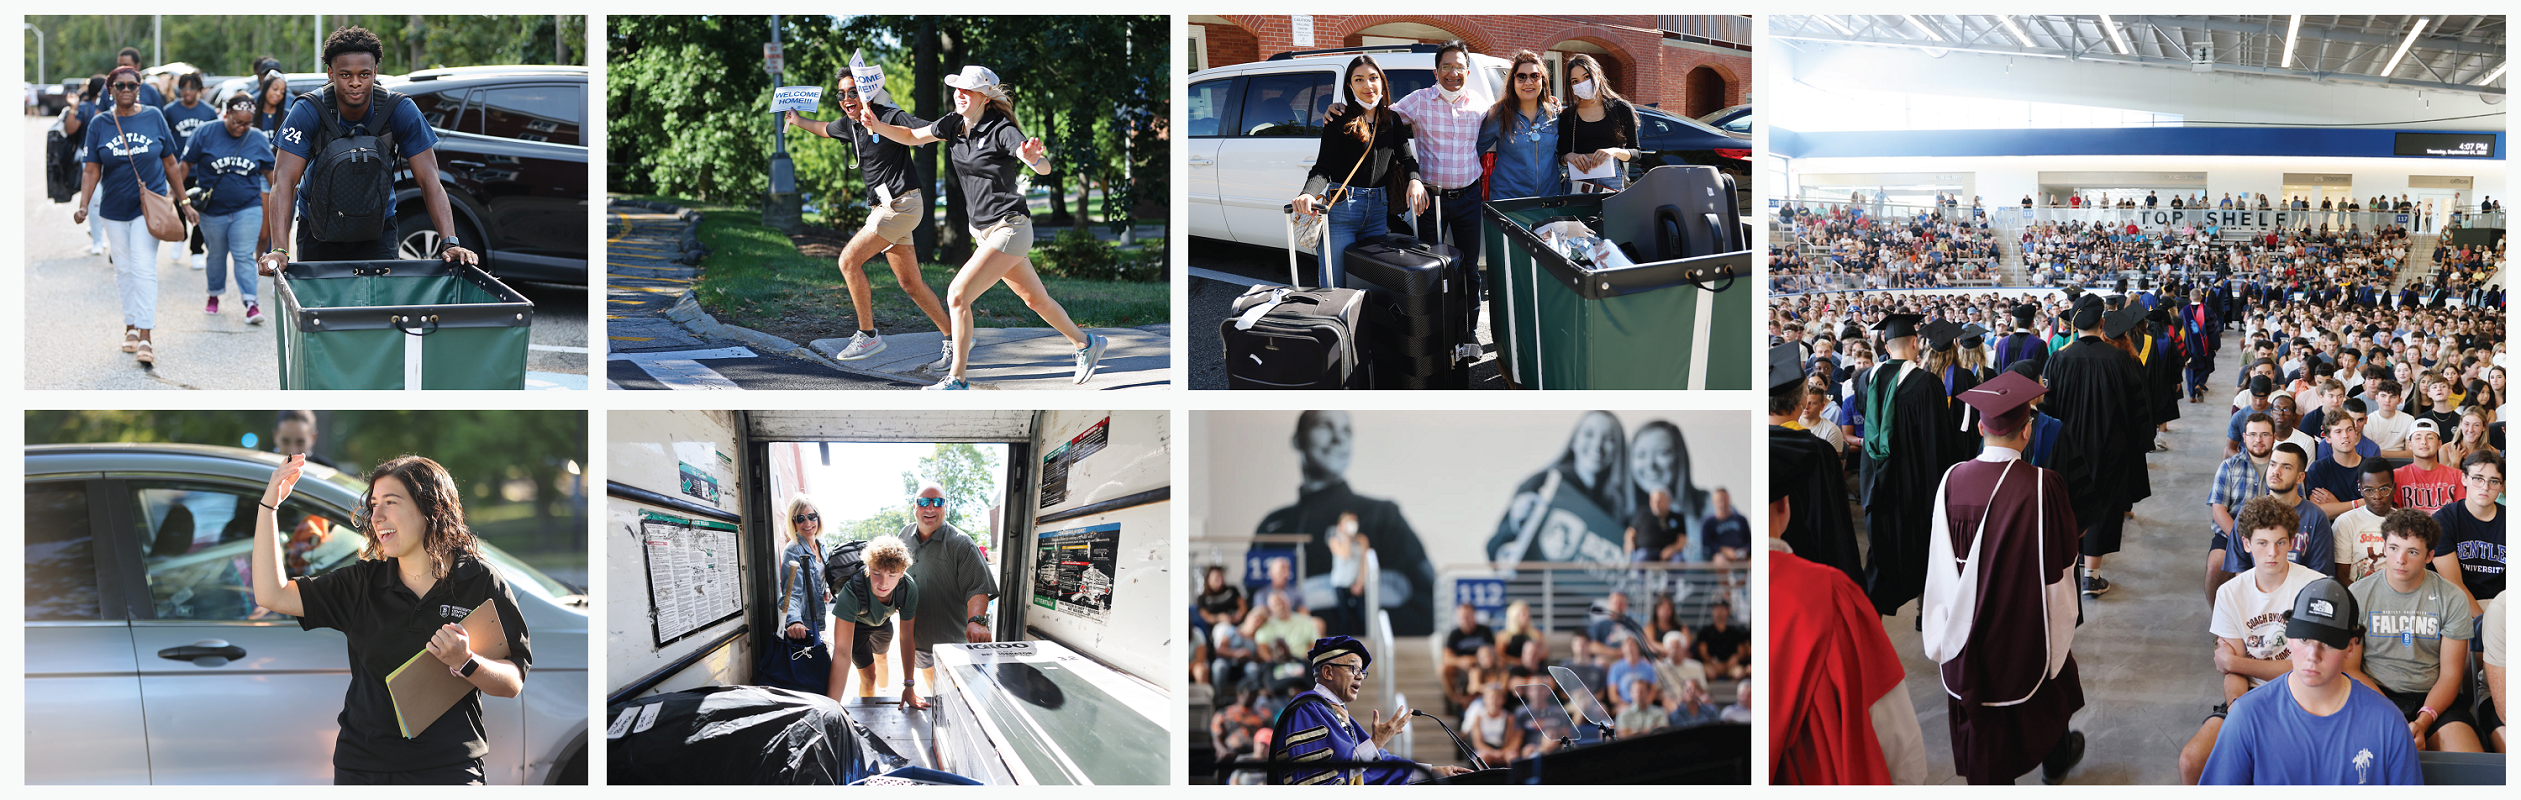 a collage of images from move-in day